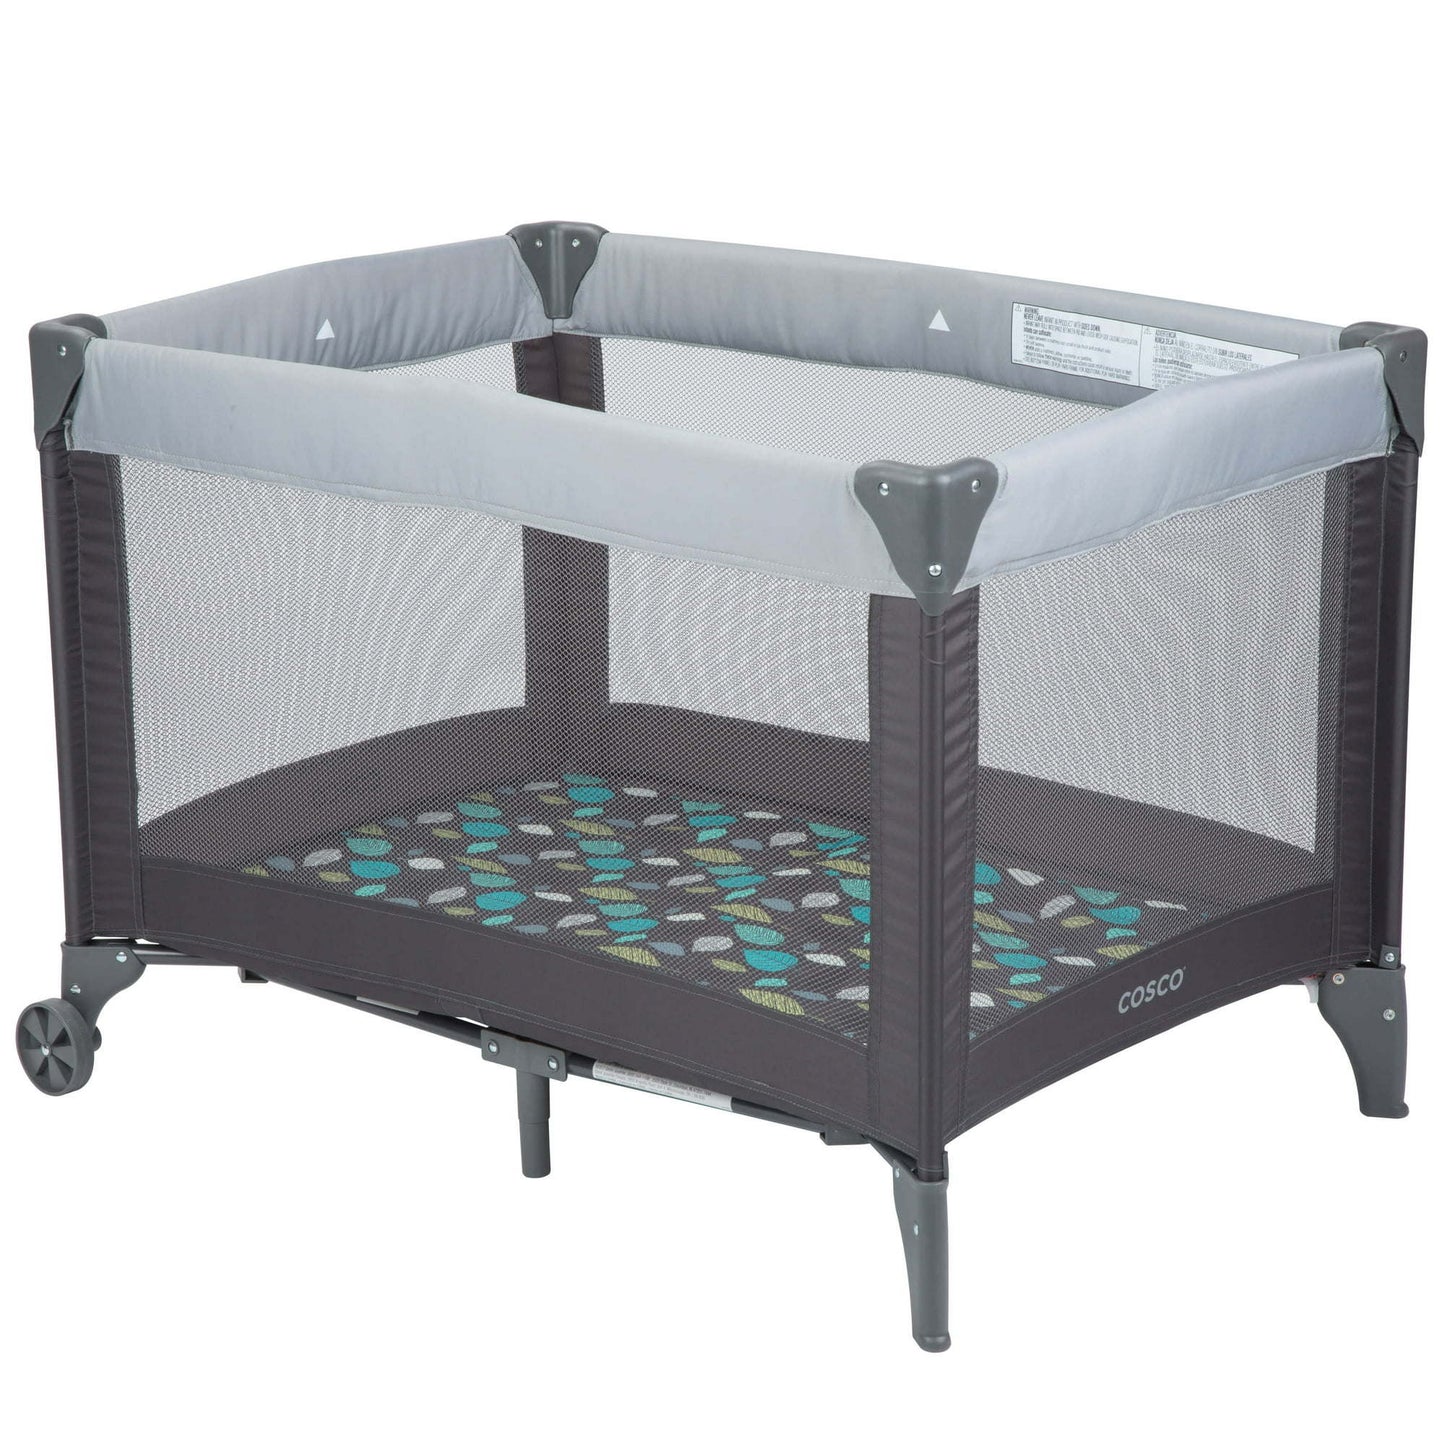 Funsport Portable Compact Baby Play Yard